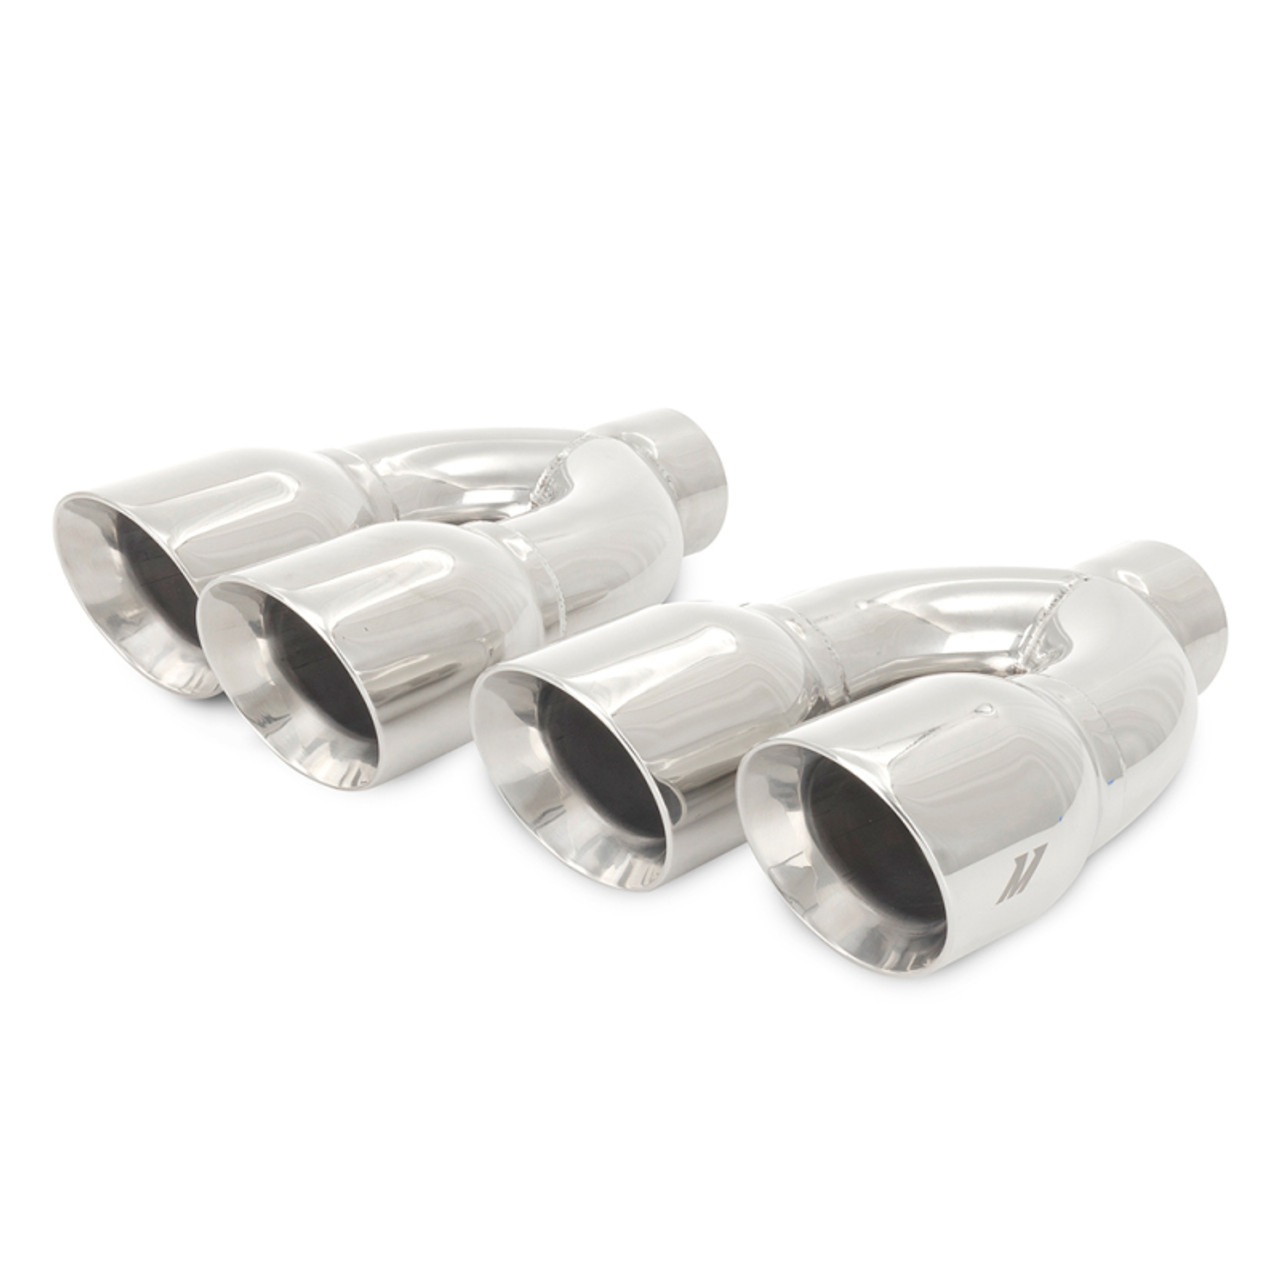 Mishimoto Universal Steel Muffler Tip 2.5in Inlet Dual Y Polished - MMEXH-TIP-QY25P Photo - Primary